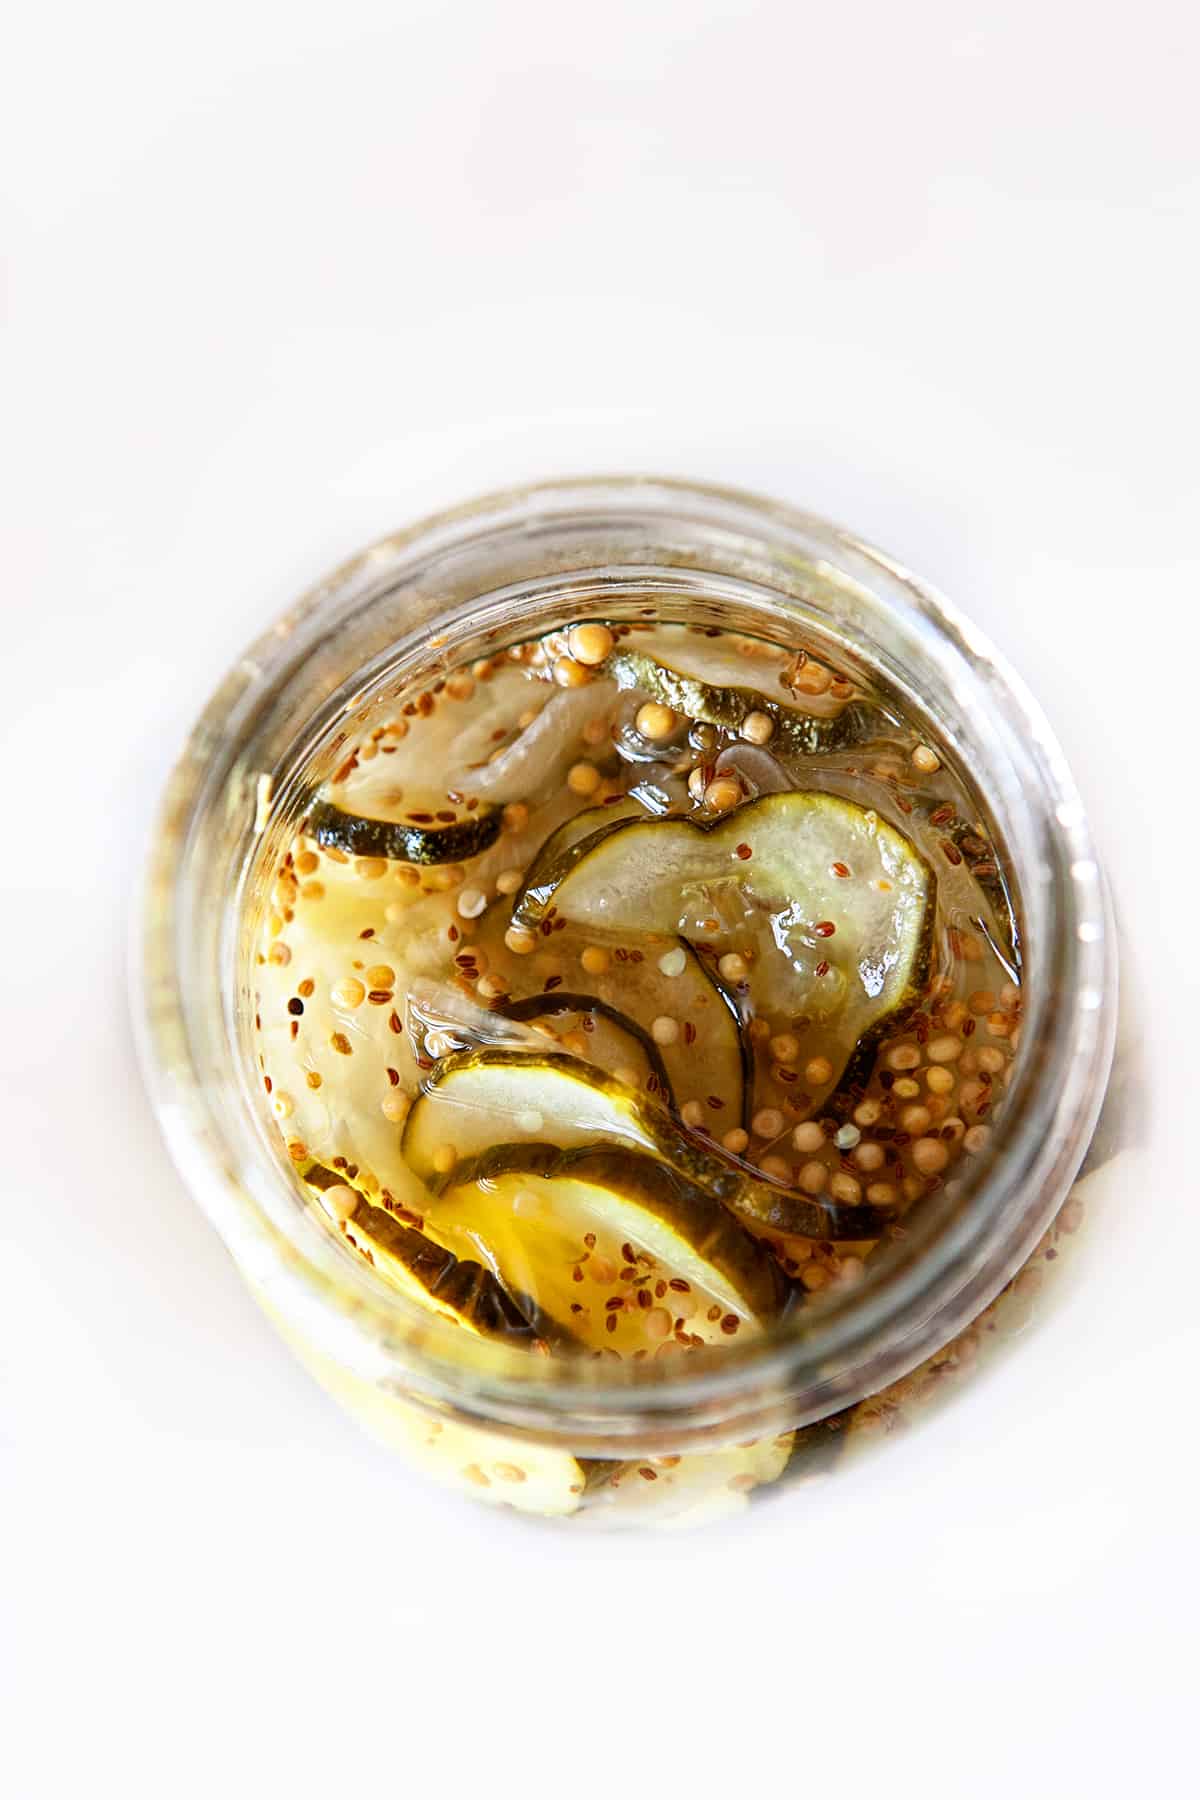 Looking into a jar of pickles